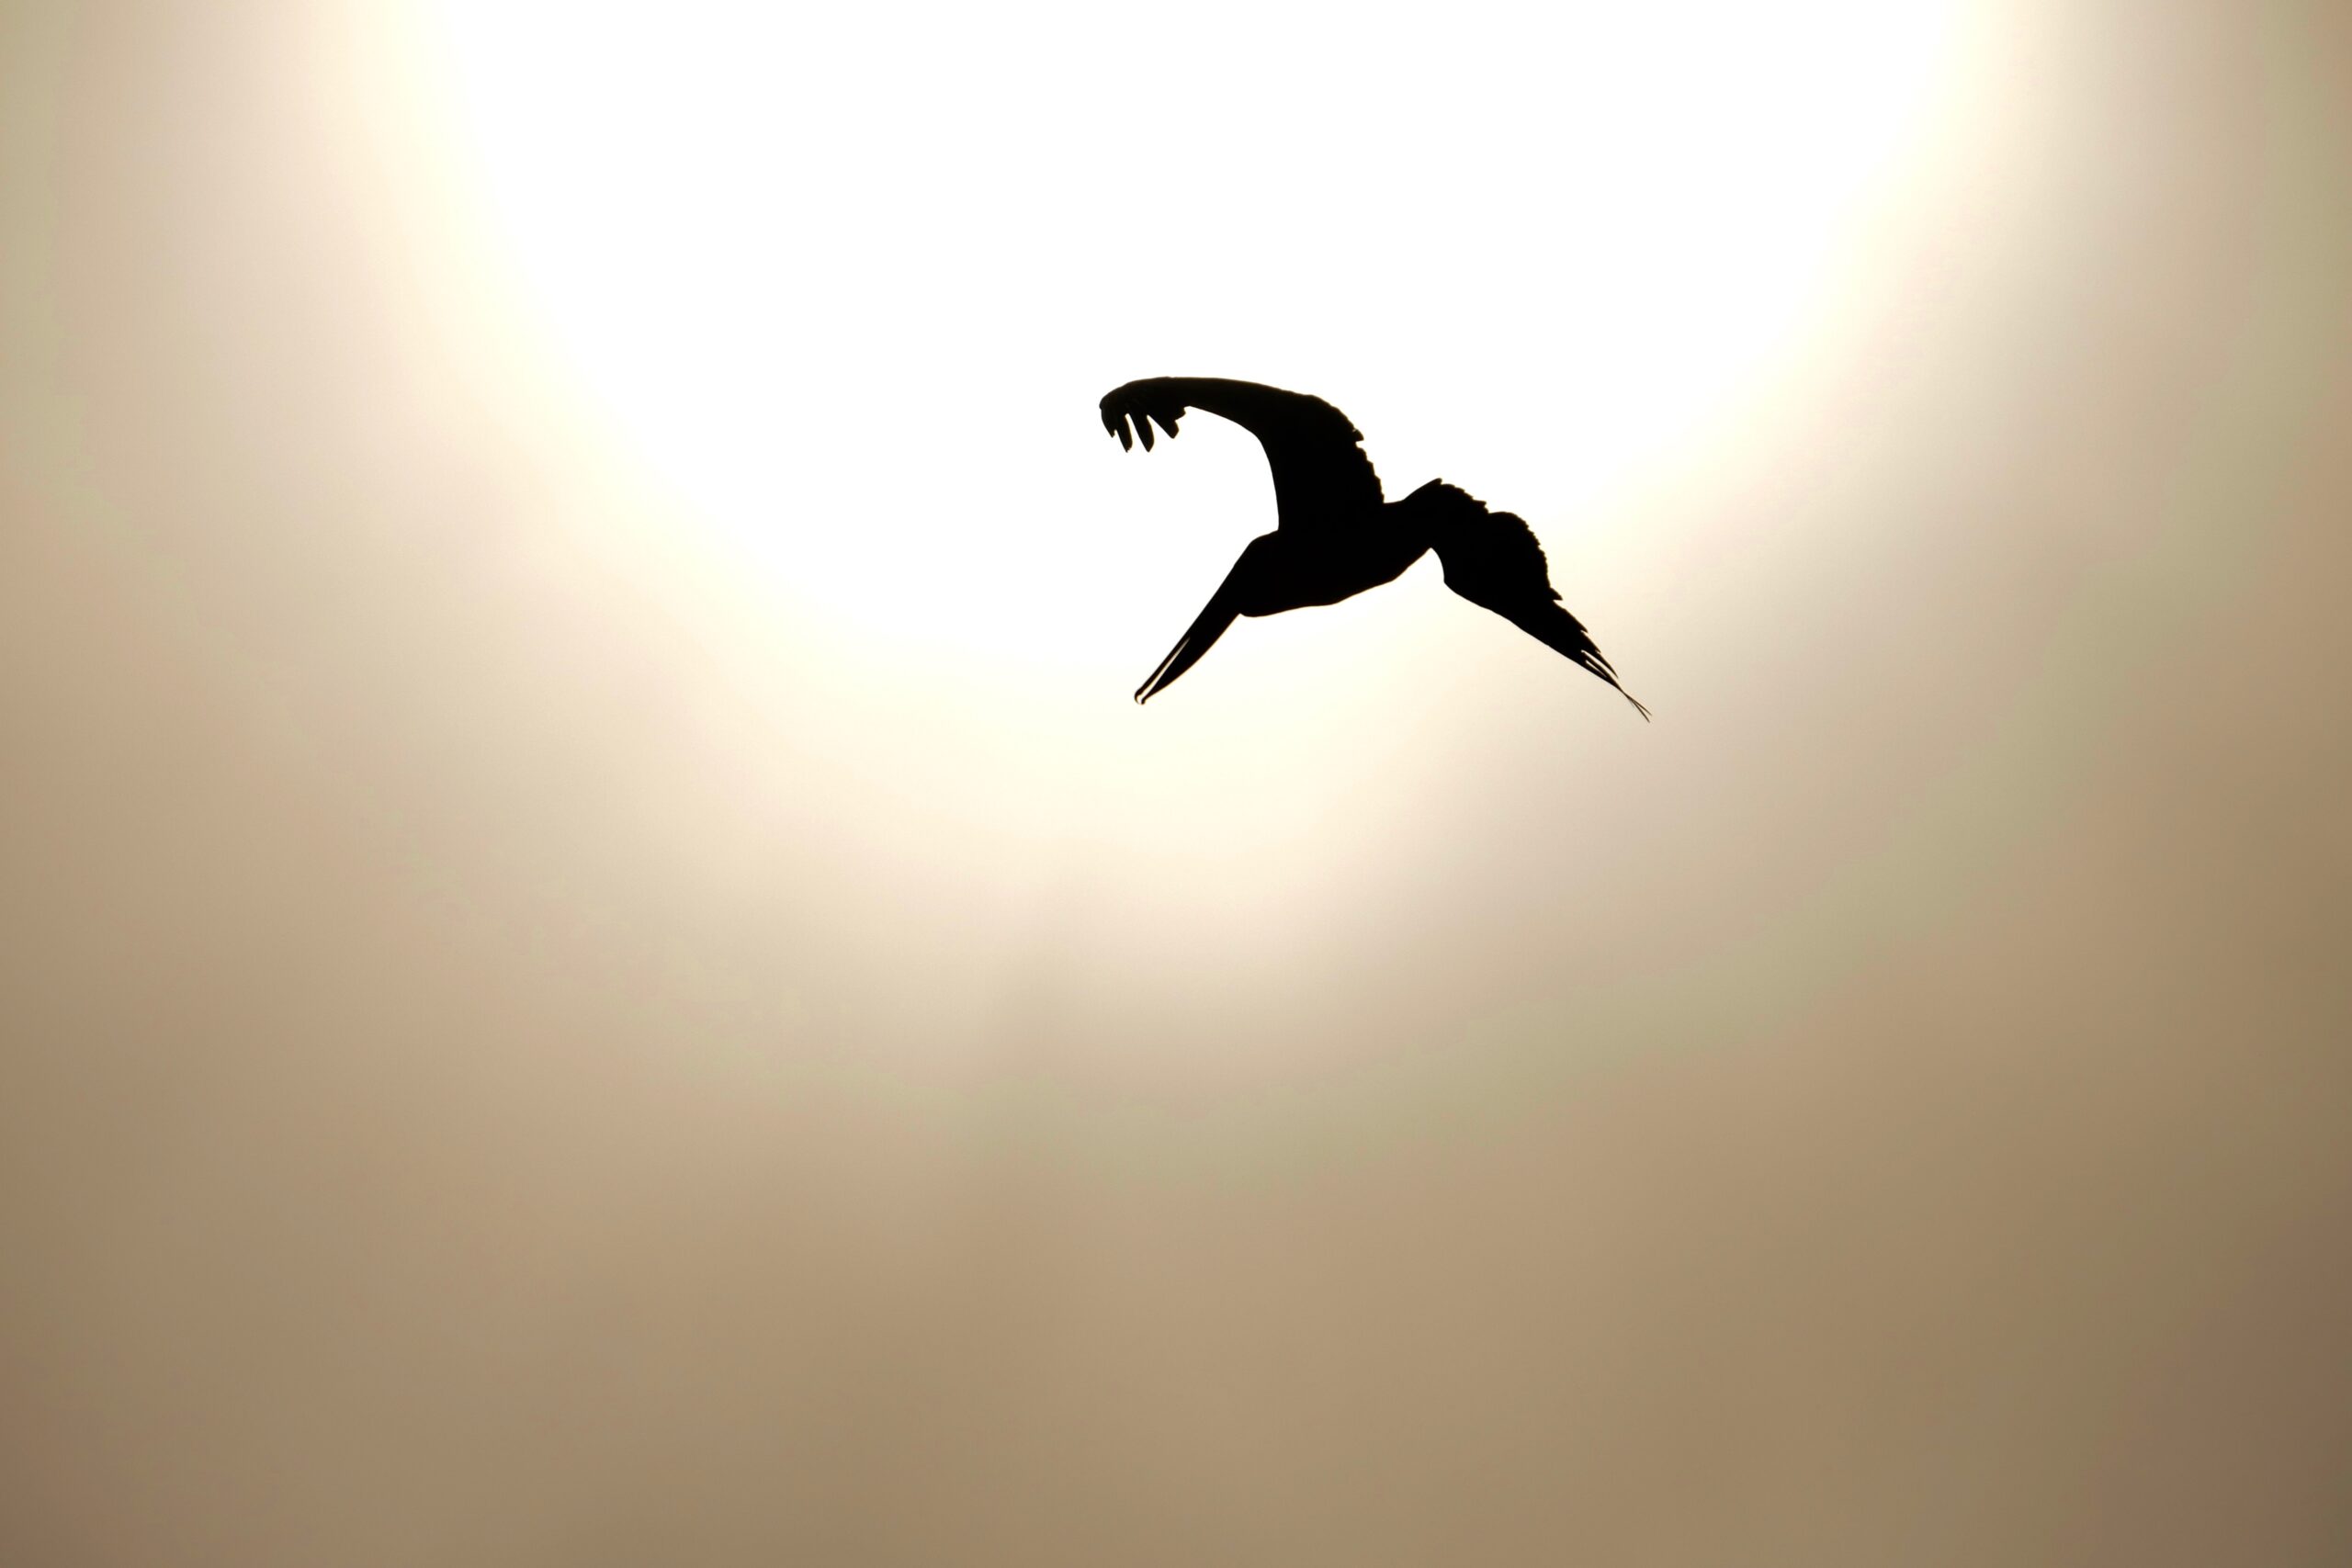 A bird flying in the sky.